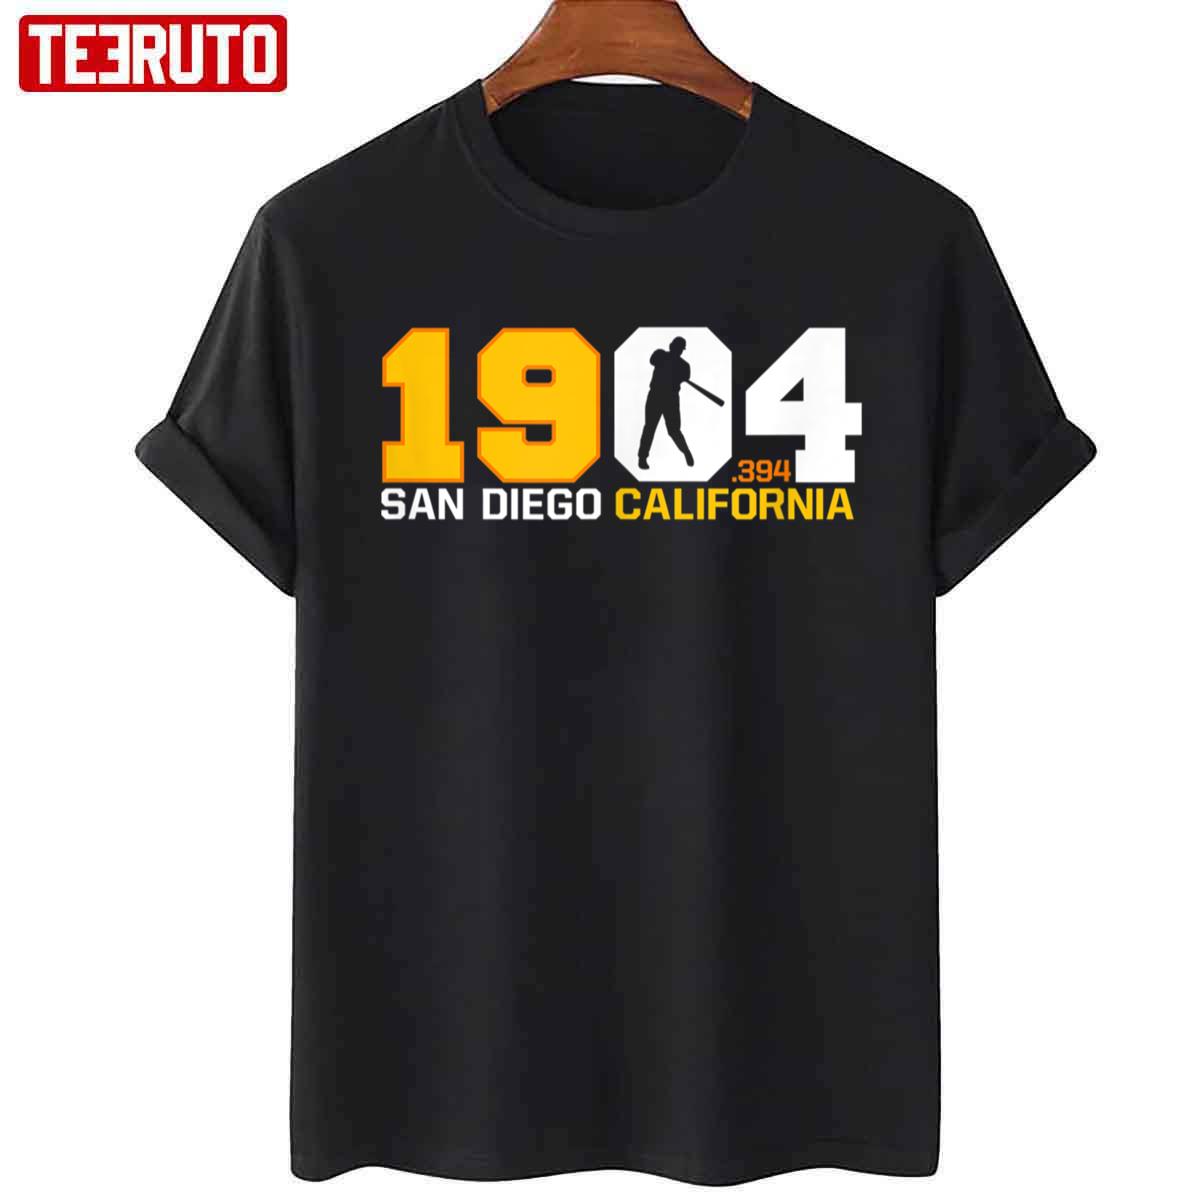 San Diego Padres: No Dream Too Great Uniform/Jersey Poster – The Black Art  Depot